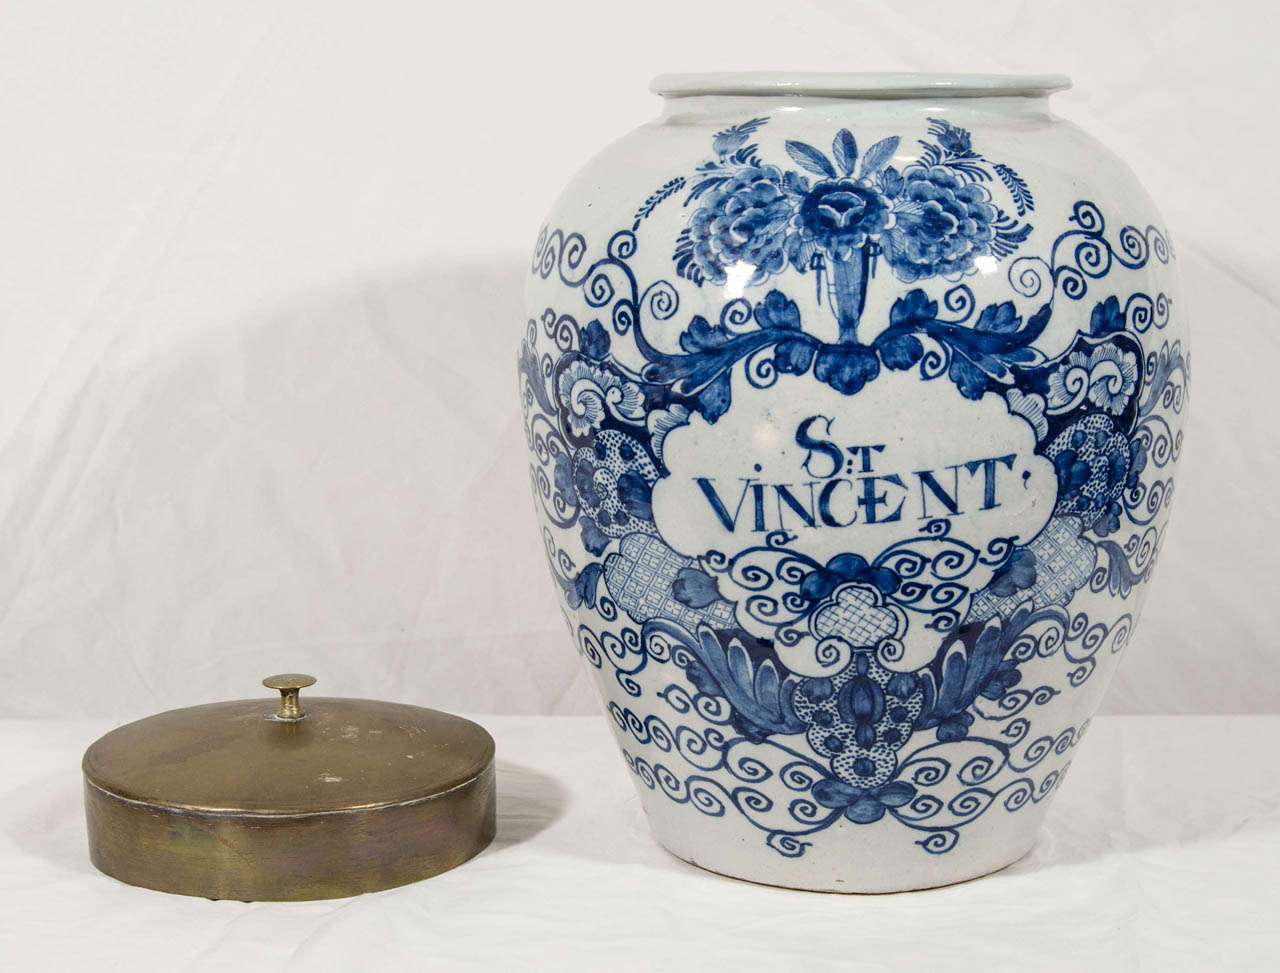 An early 19th century Dutch Delft Blue and White tobacco jar with cobalt decoration of flowers and scrolling vines encircling 